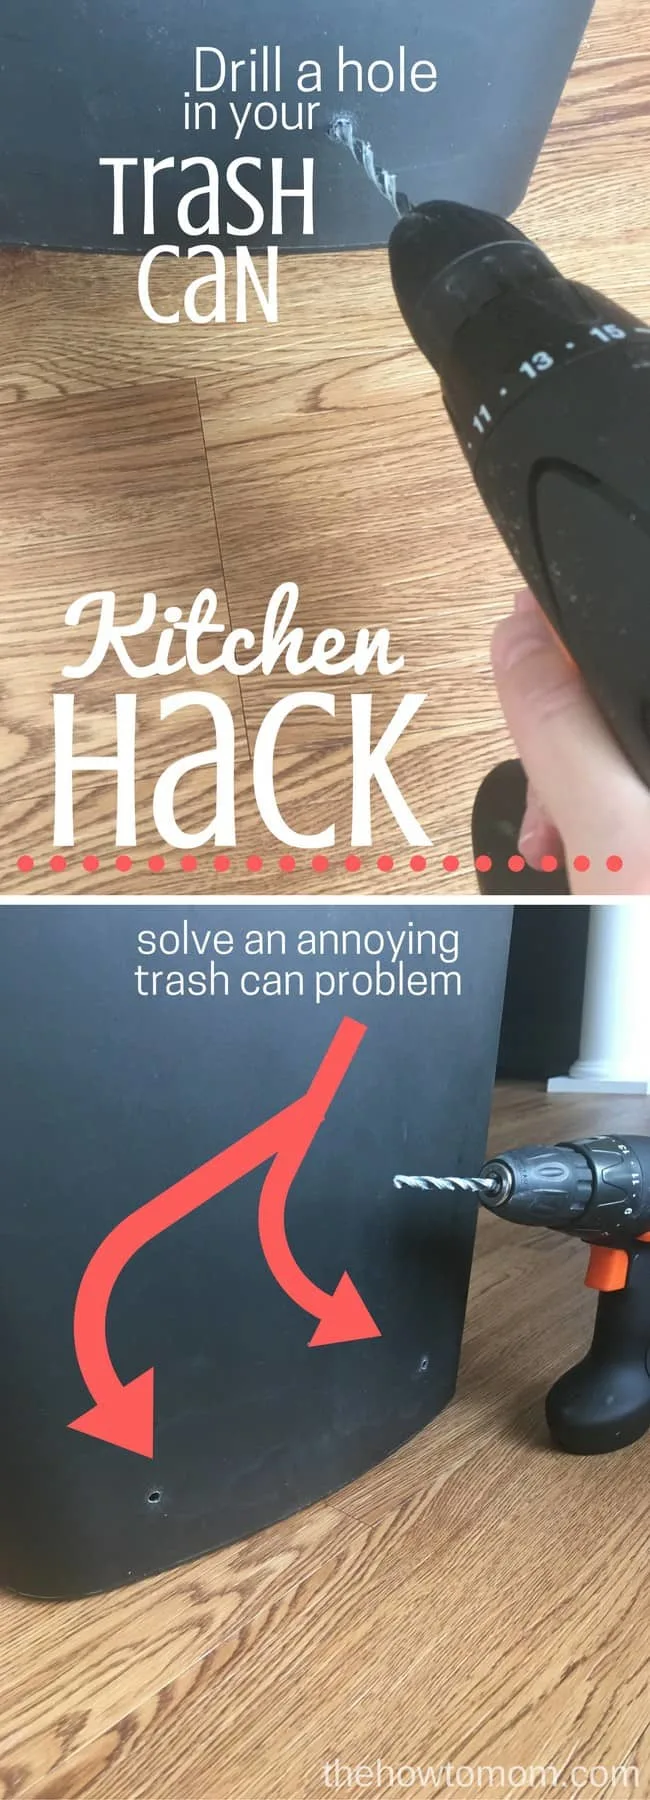 Kitchen Hack - Drill a hole in your trash can